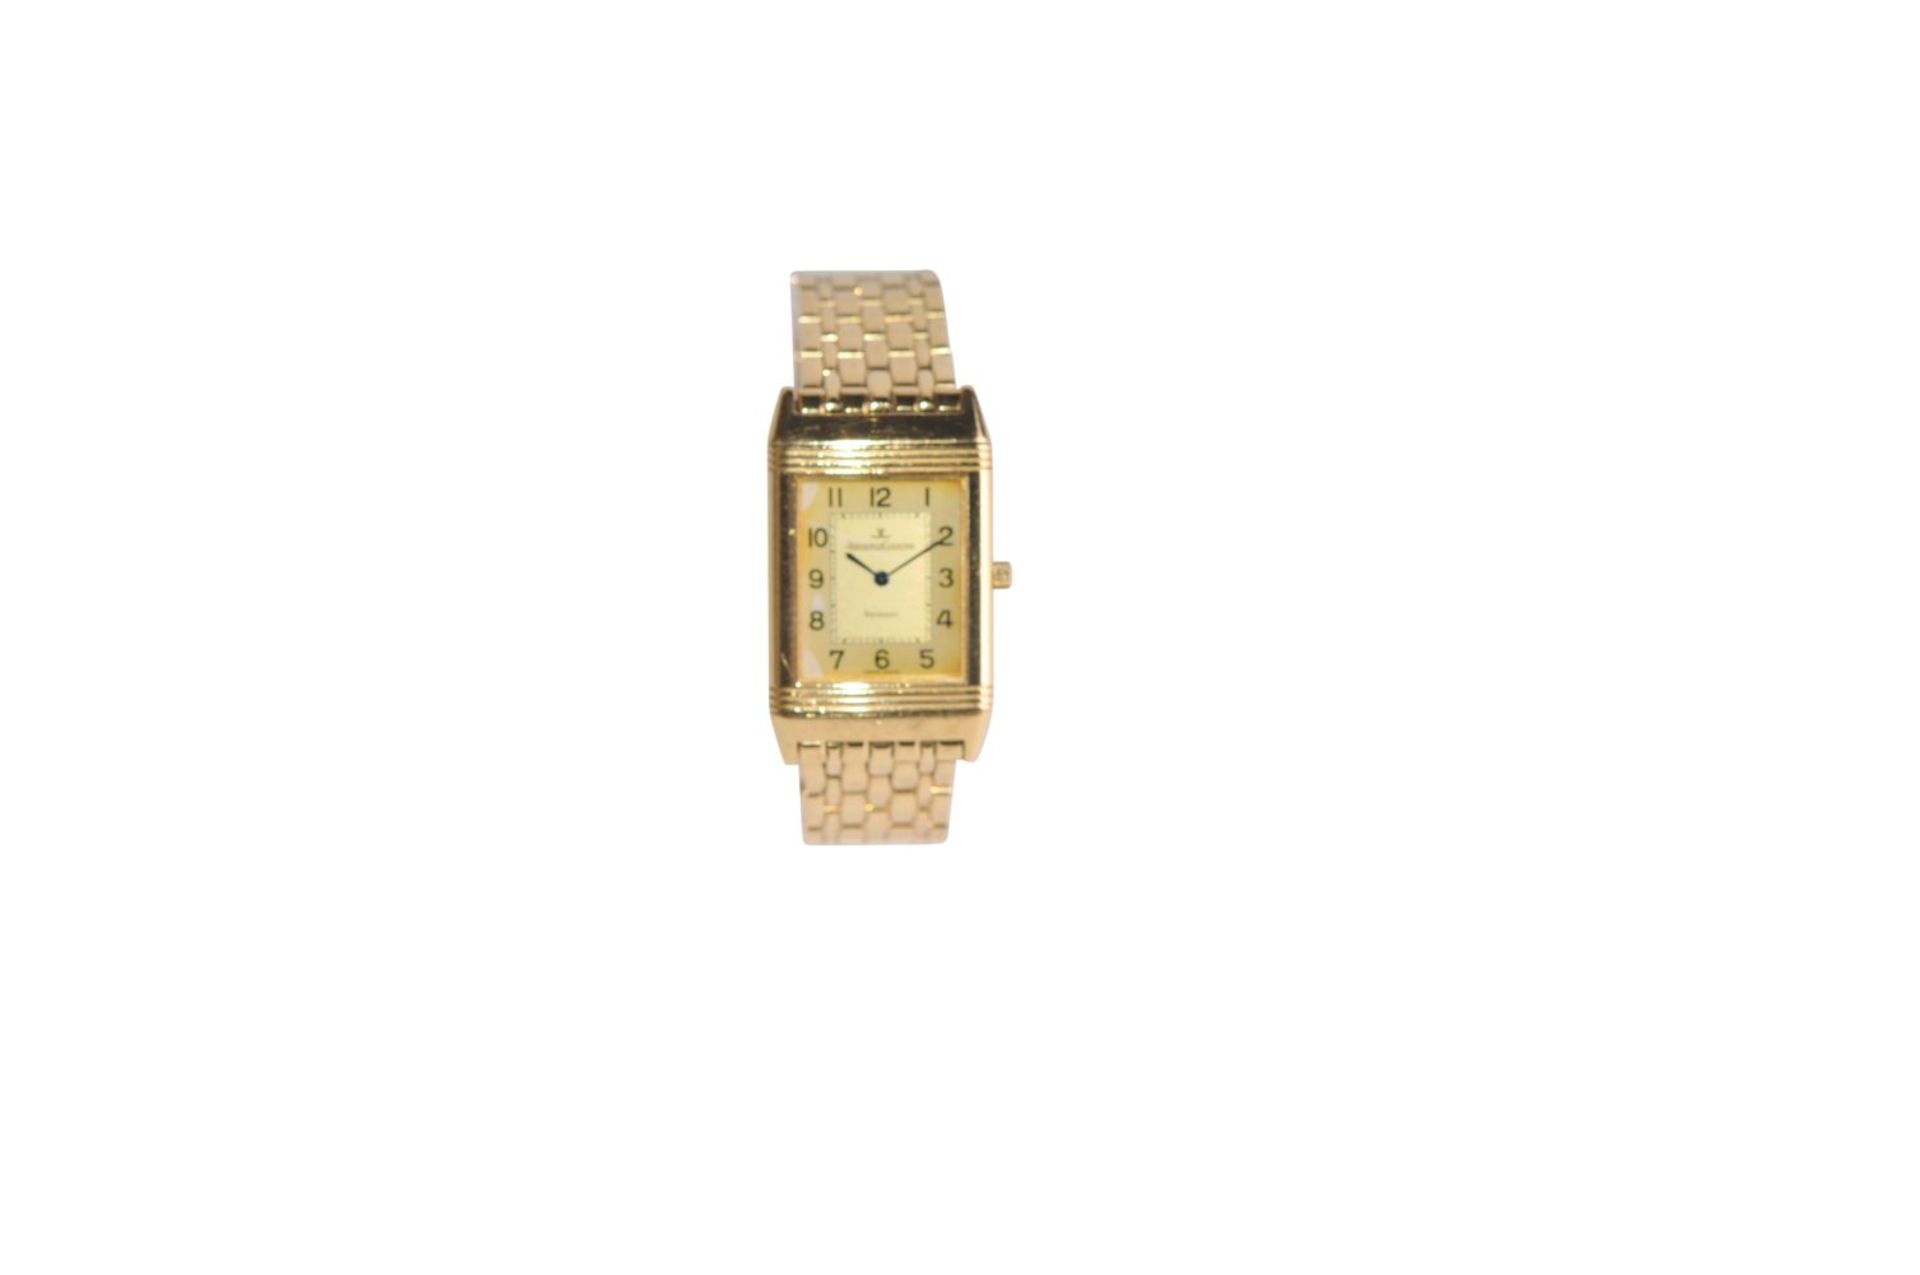 JAEGER LE-COULTRE ReversoJaeger Le Coultre Reverso with gold bracelet, Classic Medium model with